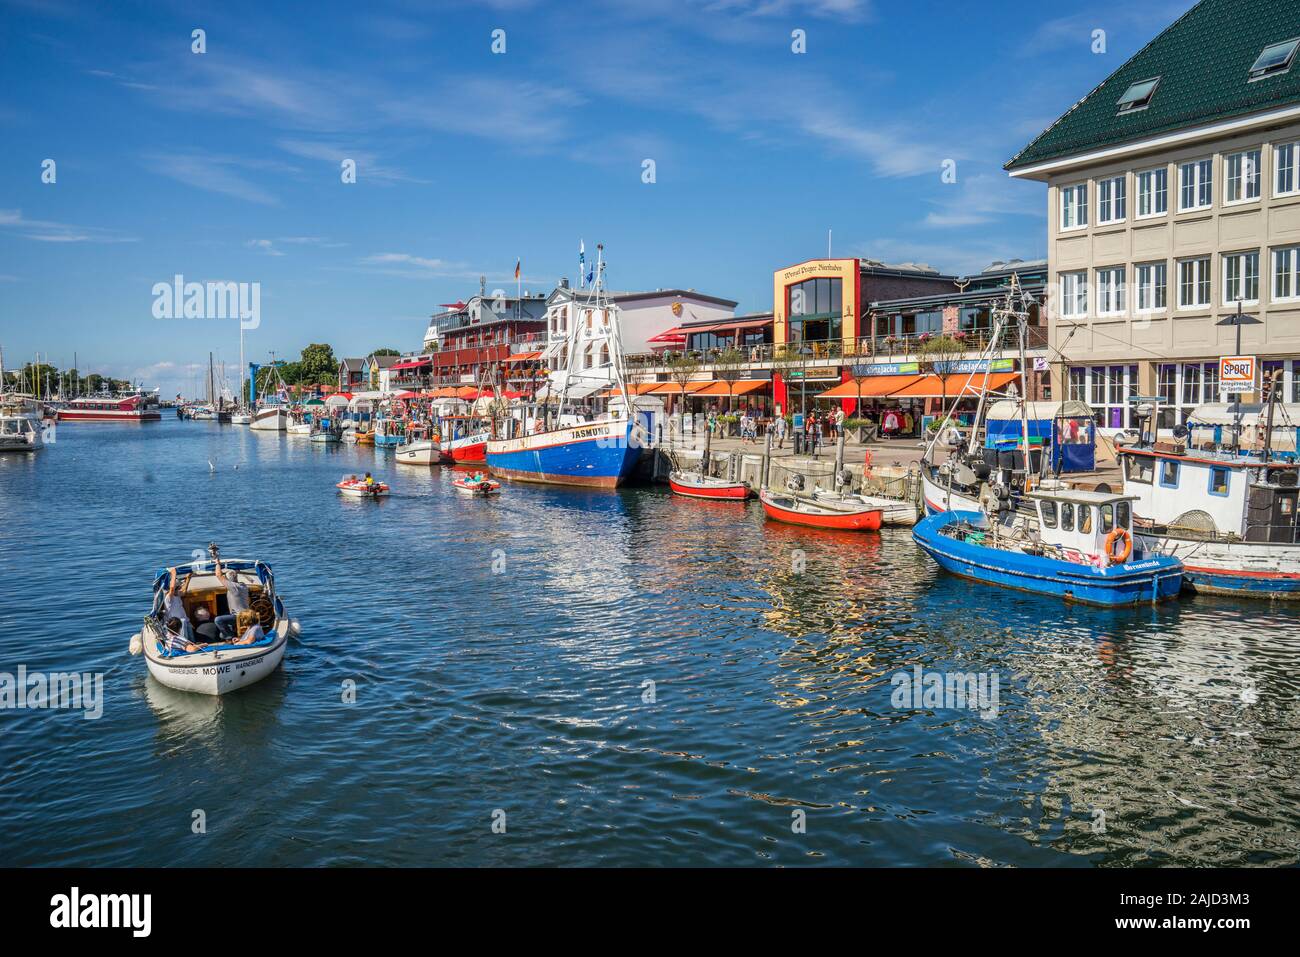 Alter Strom canal, prominent tourist venture with shops, harbour cruise boats and fishing vessels at the Baltic Sea port of Warnemünde, Mecklenburg-Vo Stock Photo